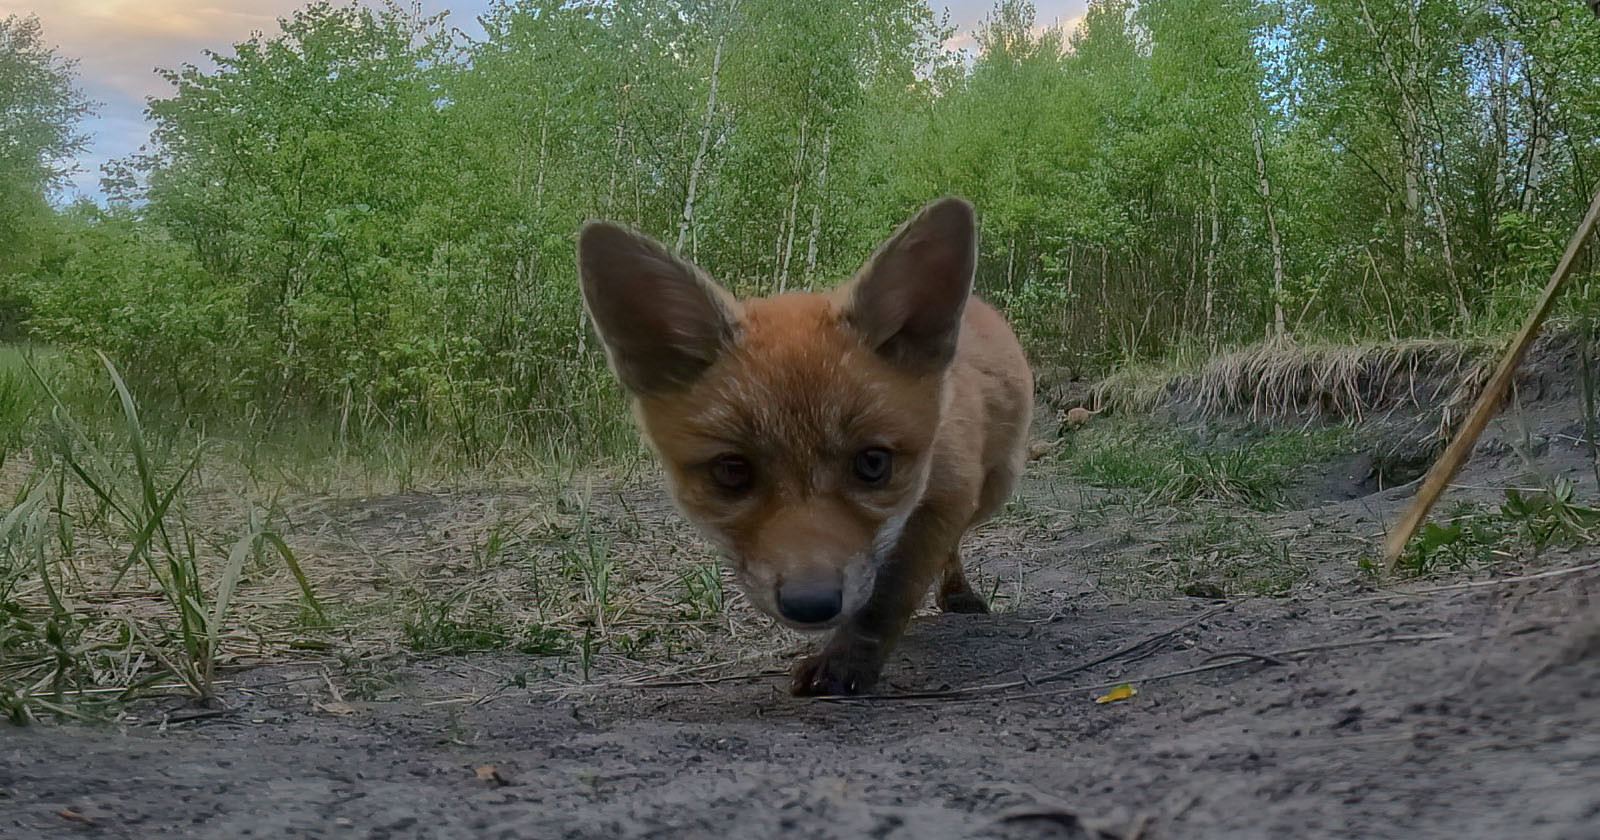  baby foxes find gopro play adorable 